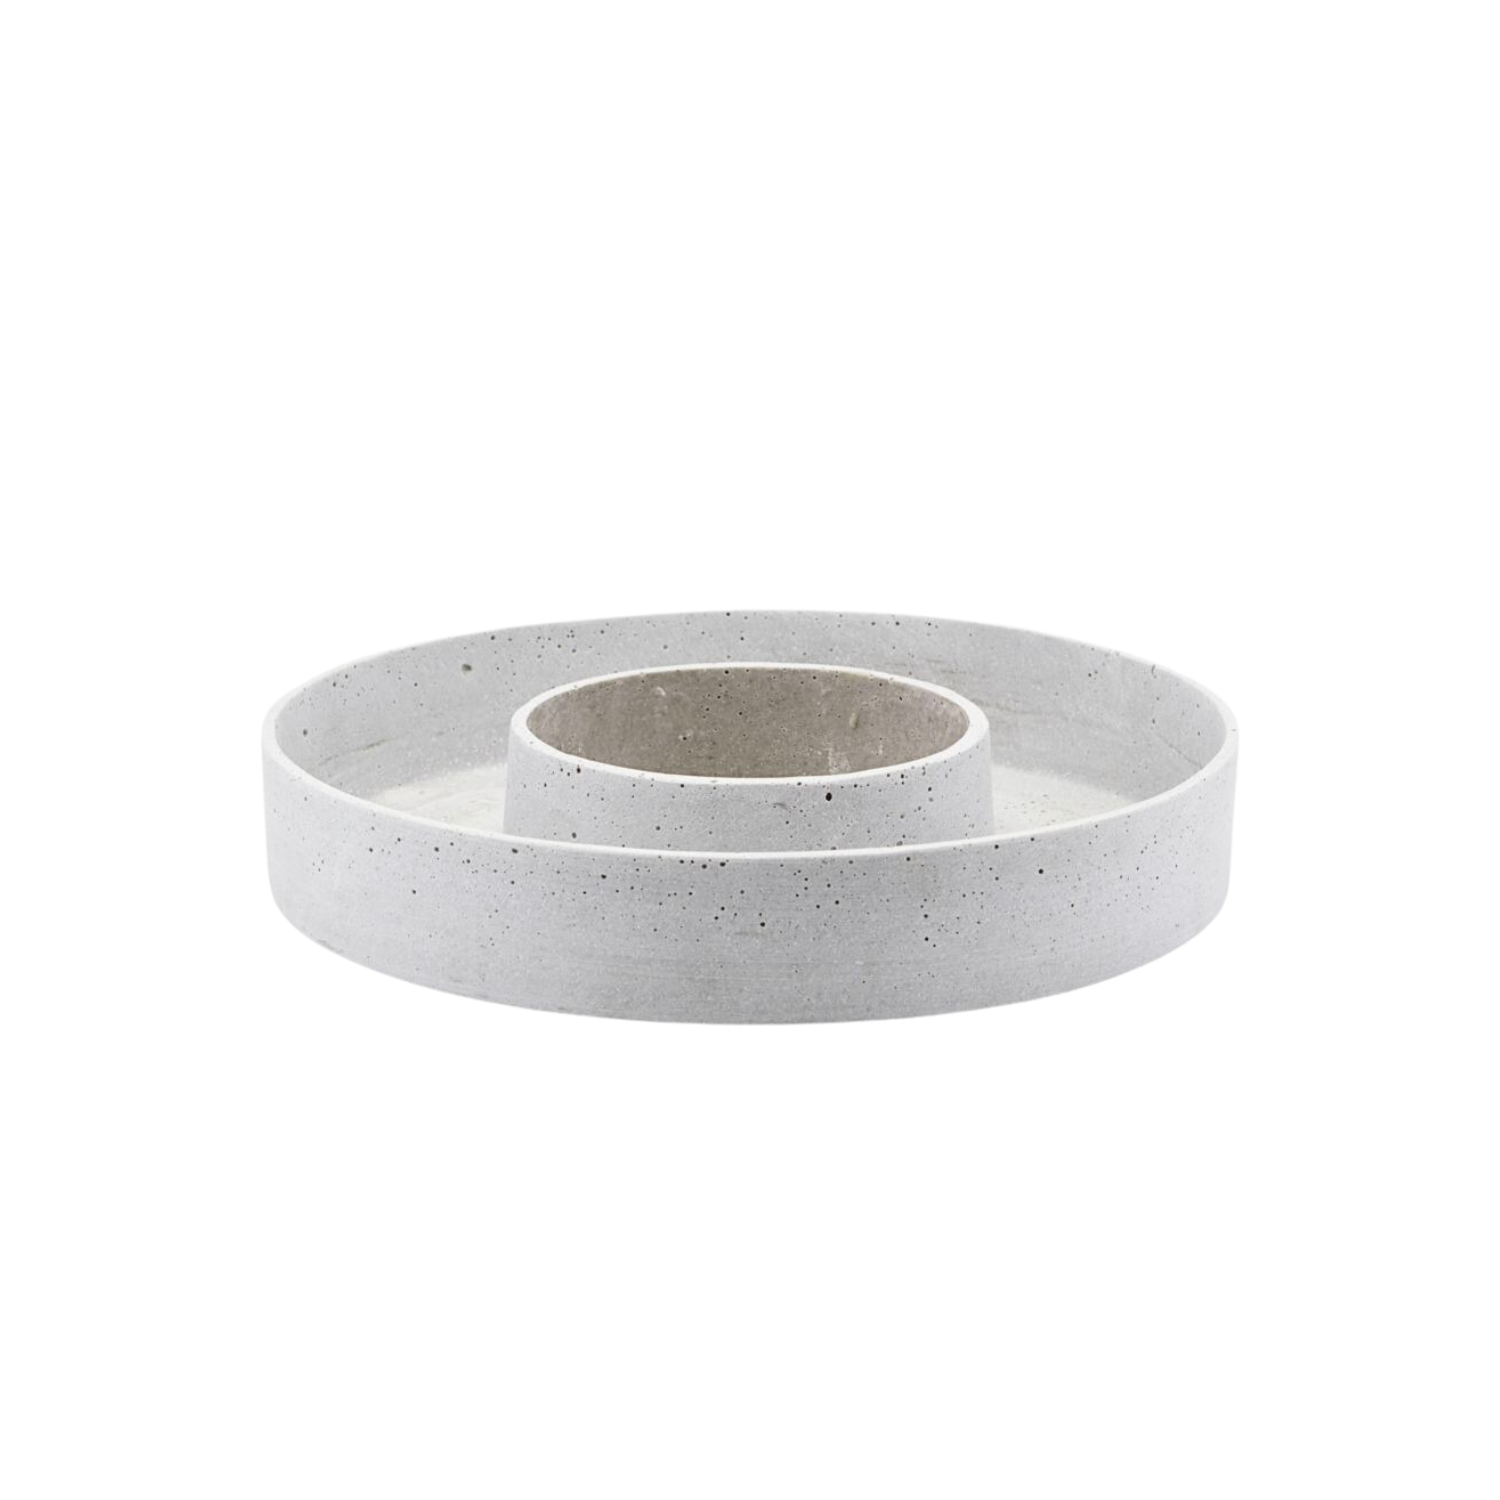 Concrete Ring Candle Holder